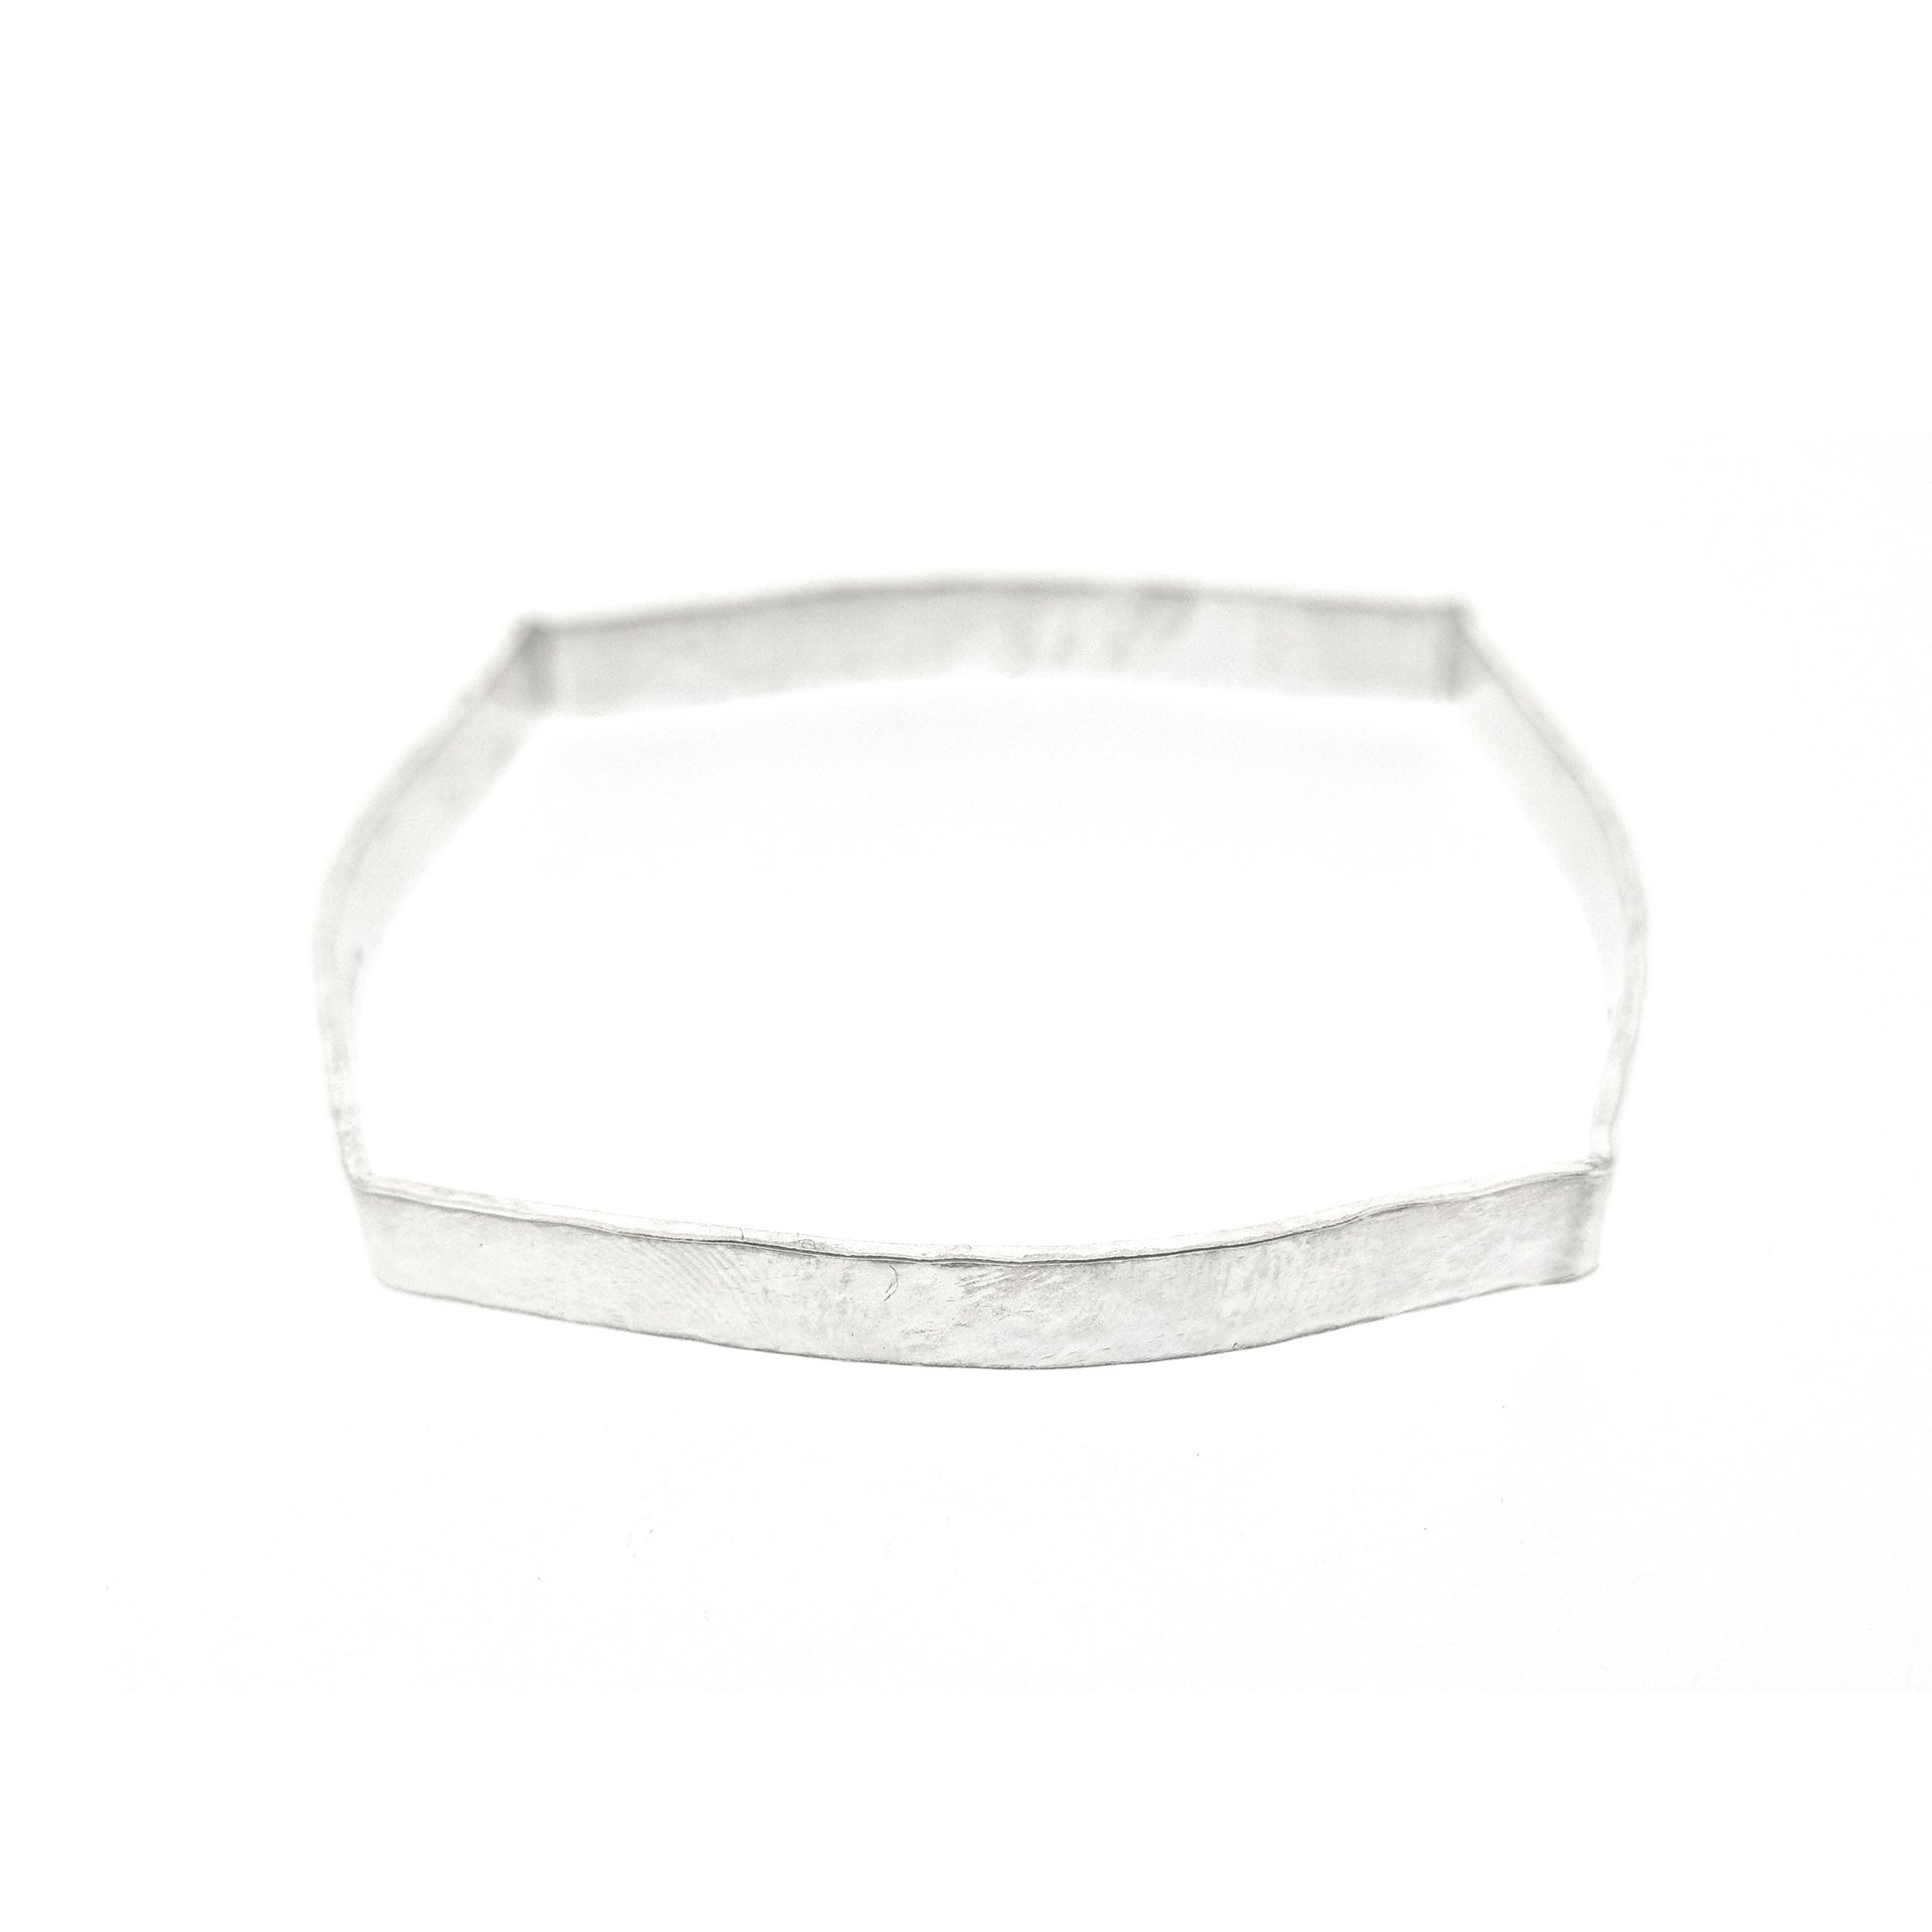 Silver hammered bangle with a round and square profile.